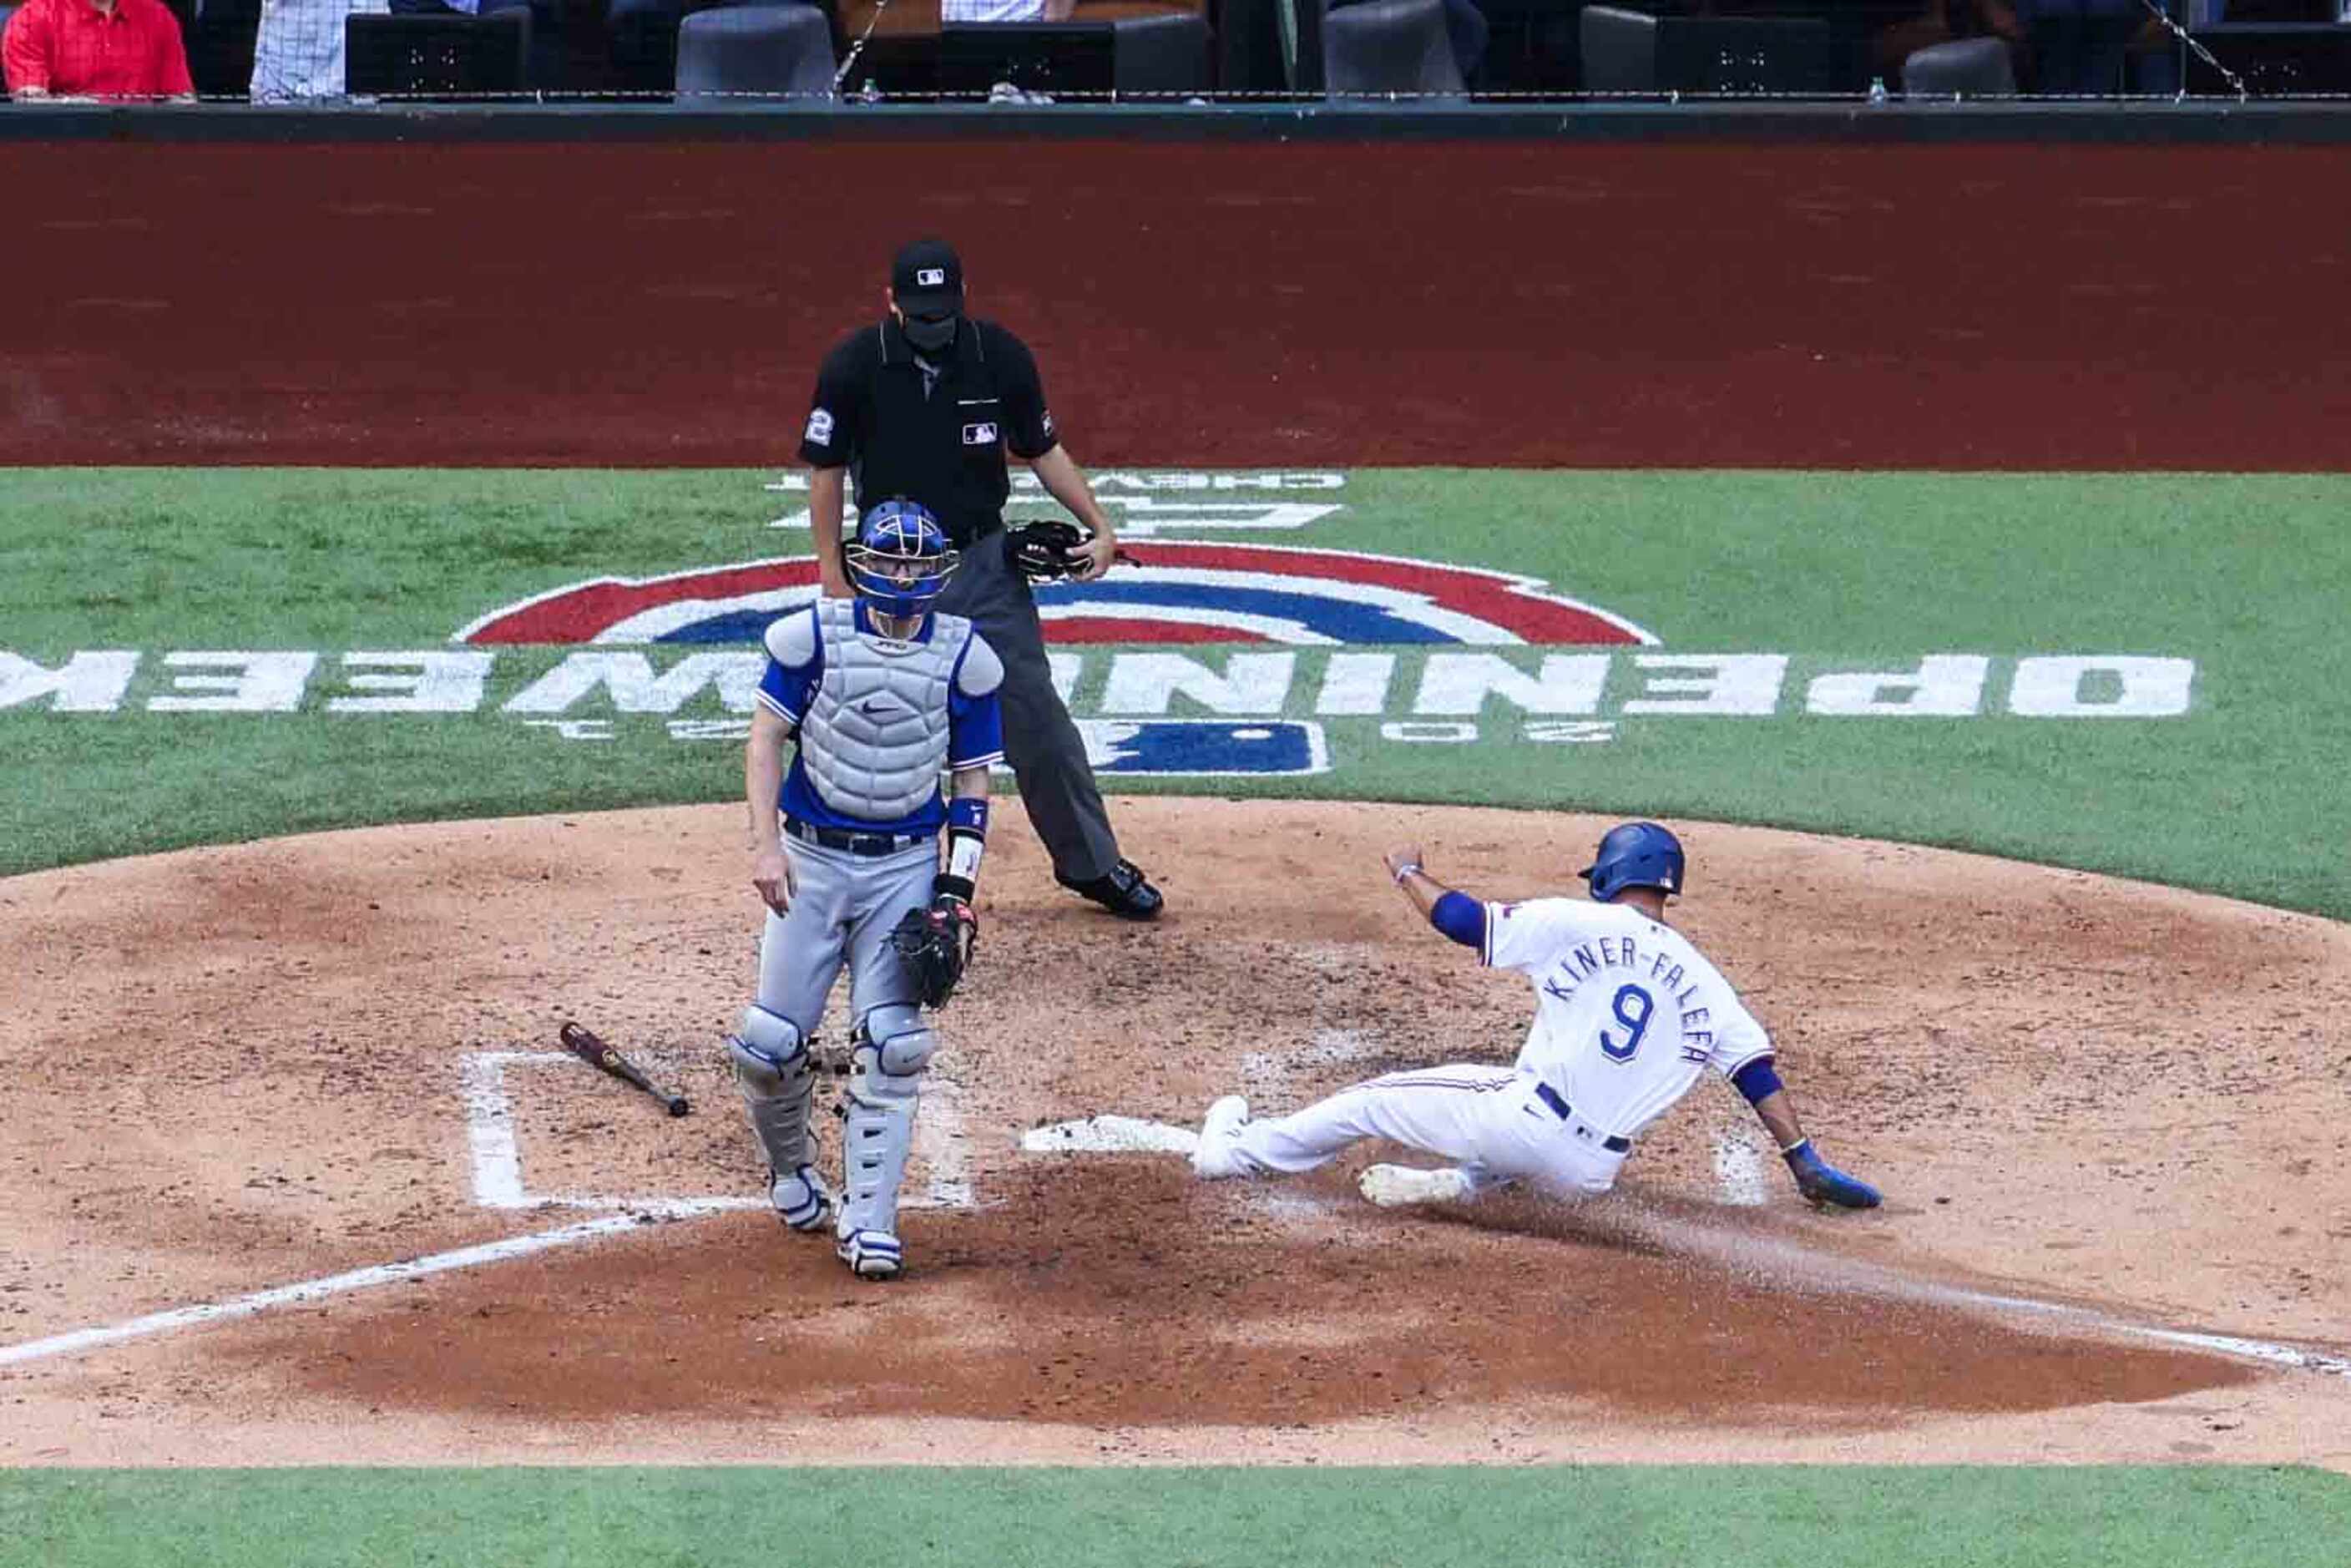 Texas Rangers' infielder Isiah Kiner-Falefa No. 9 slides to home plate to add the first run...